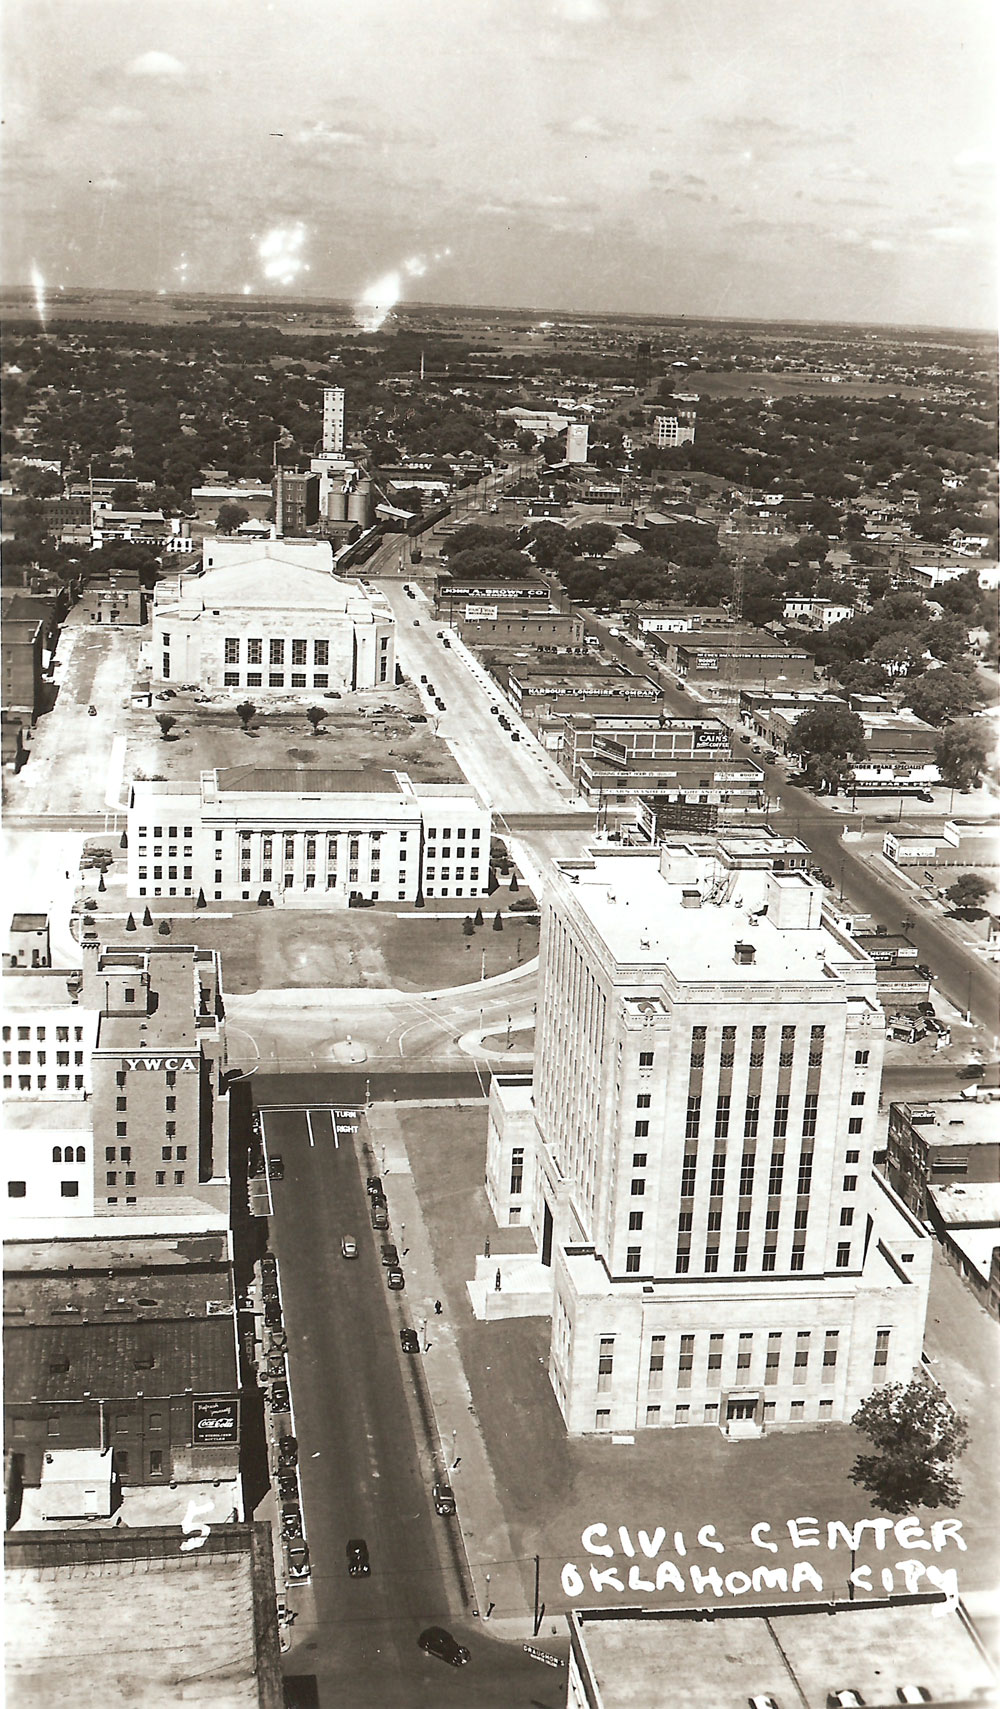 (RAC.2010.09.03) - Civic Center Under Construction, View West from First National Building, c. early 1937